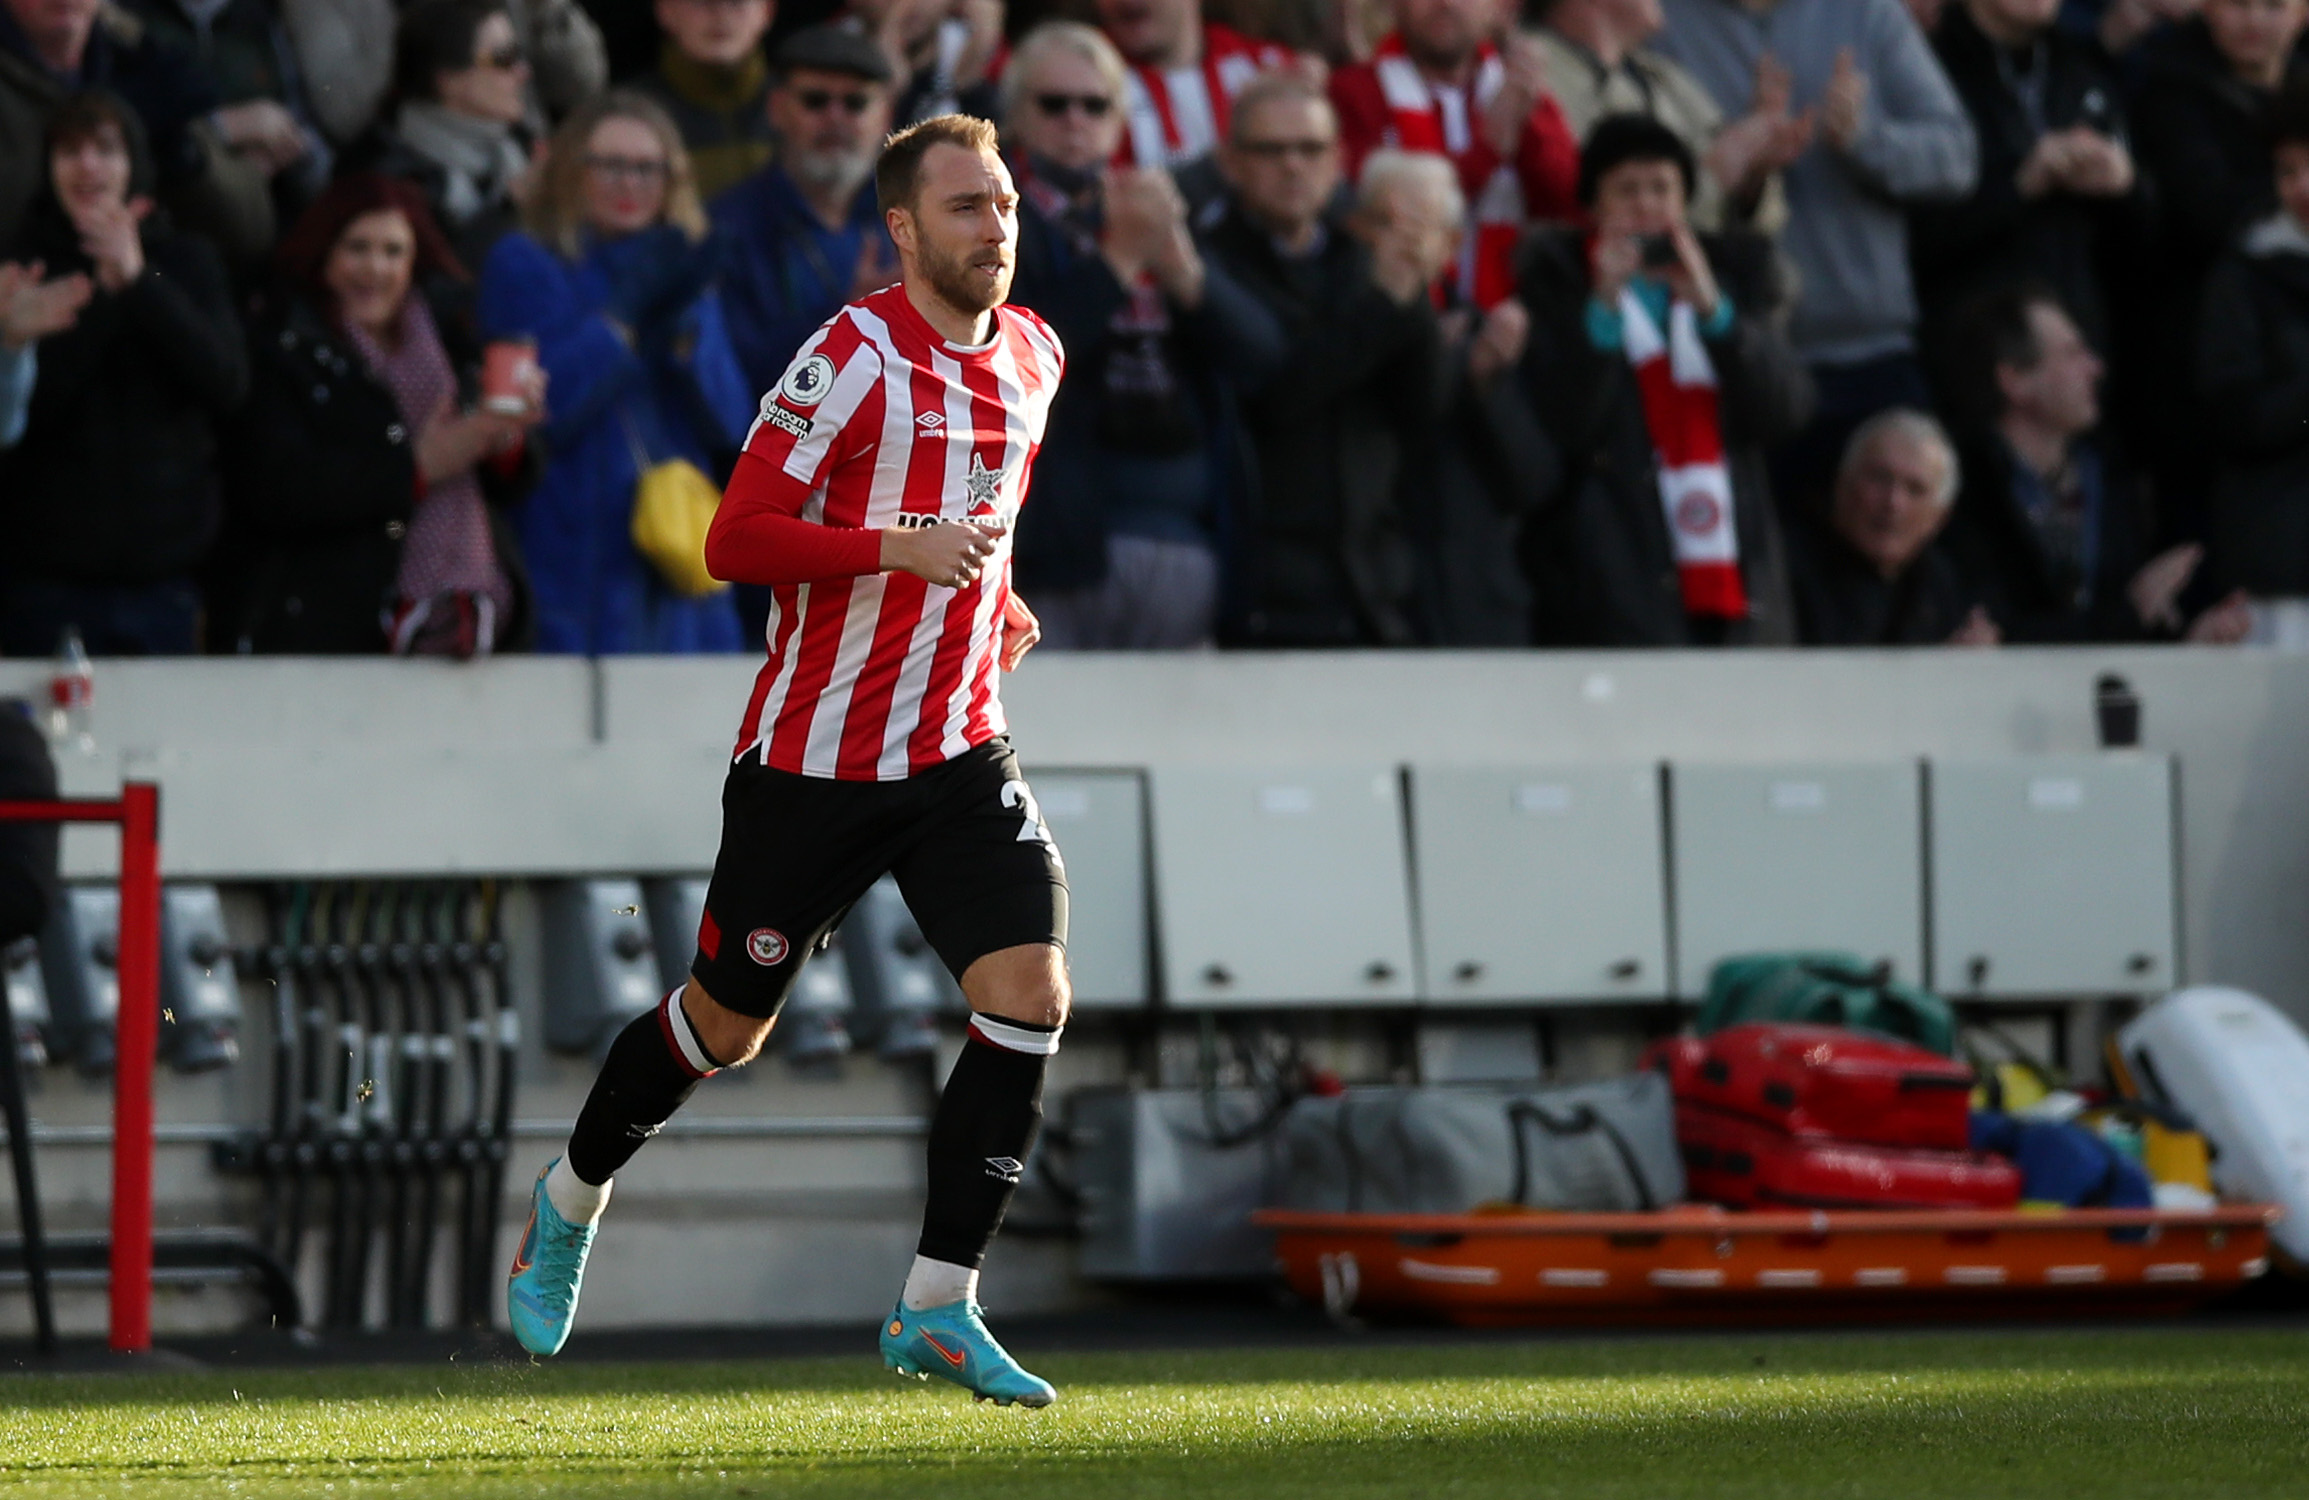 Christian Eriksen debut: Denmark midfielder Christian Eriksen makes his Brentford debut and is in action for the first time since suffering a Cardiac arrest at the Euro 2020